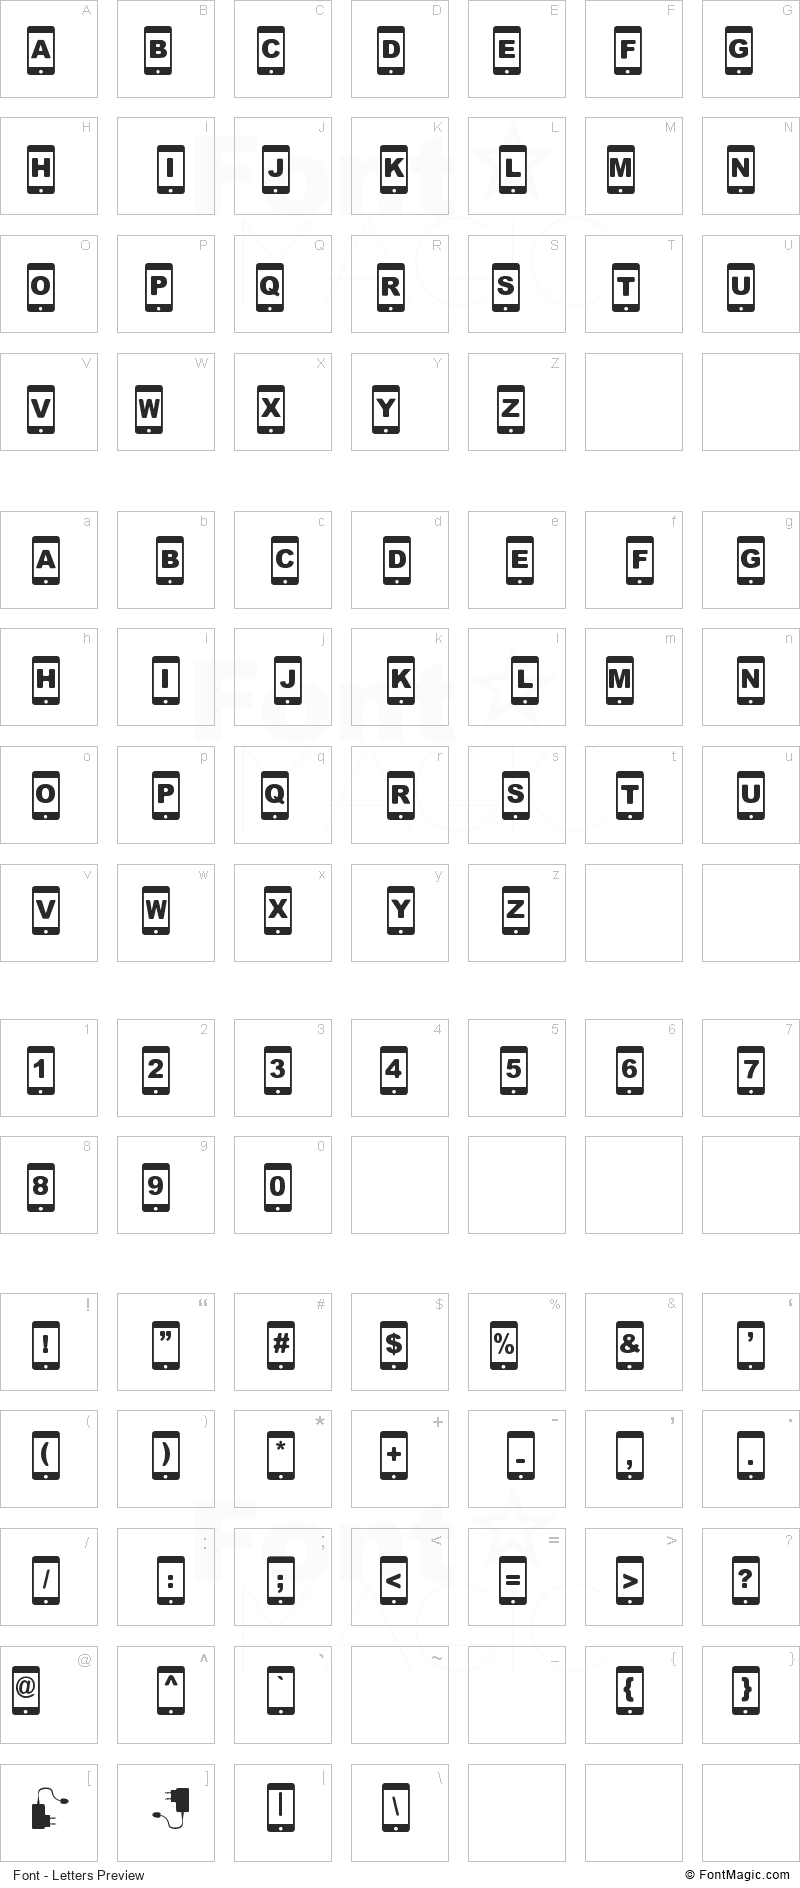 Smartphone Font - All Latters Preview Chart